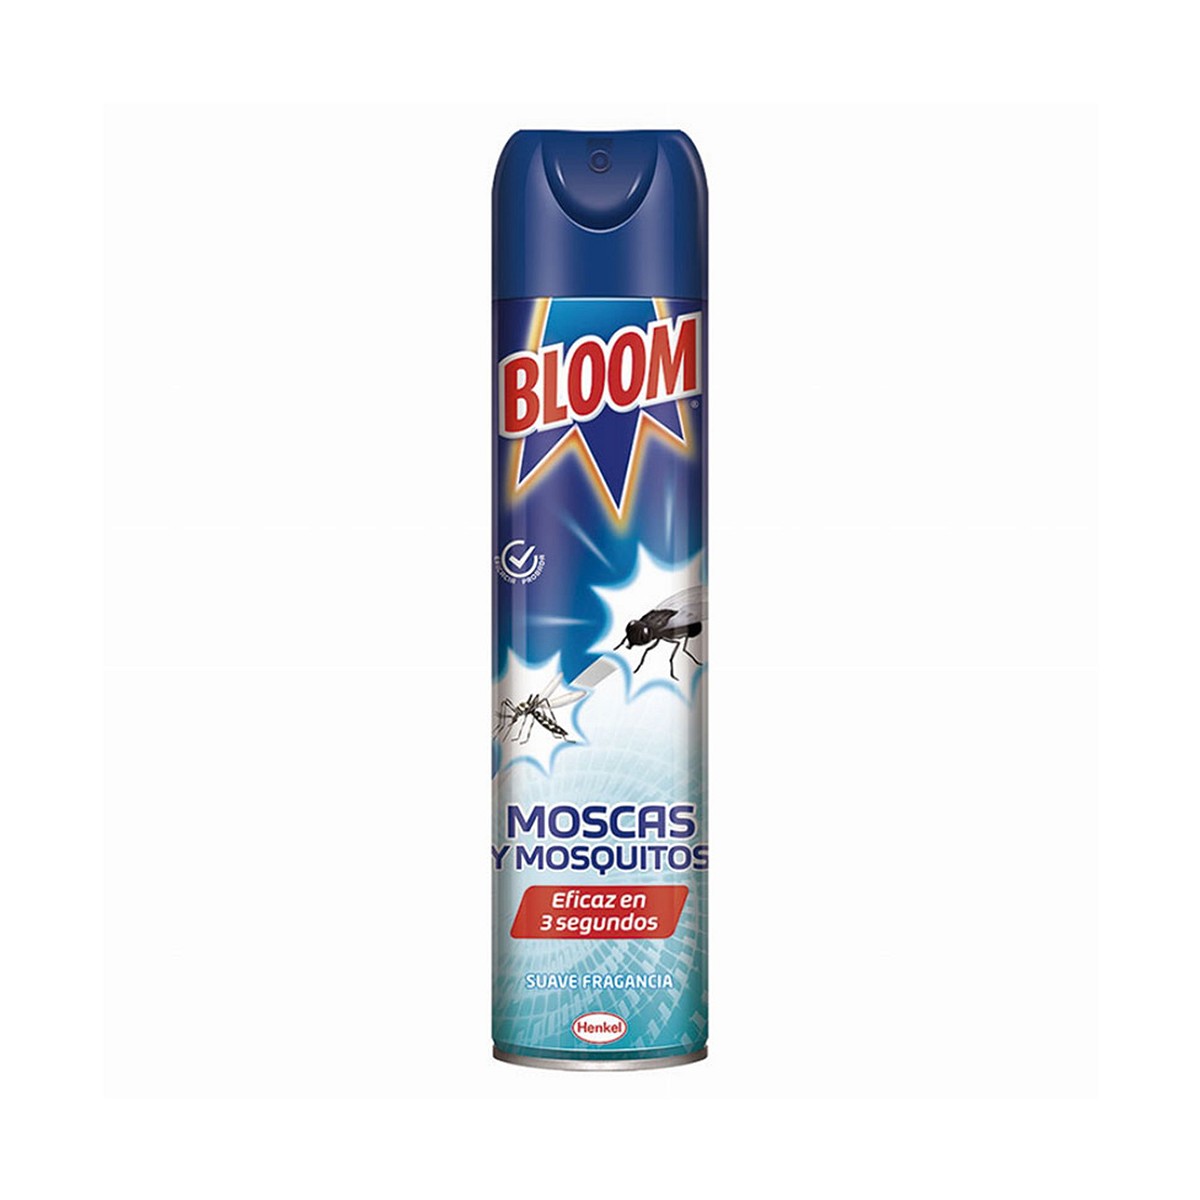 Insect bloom moscas 600ml